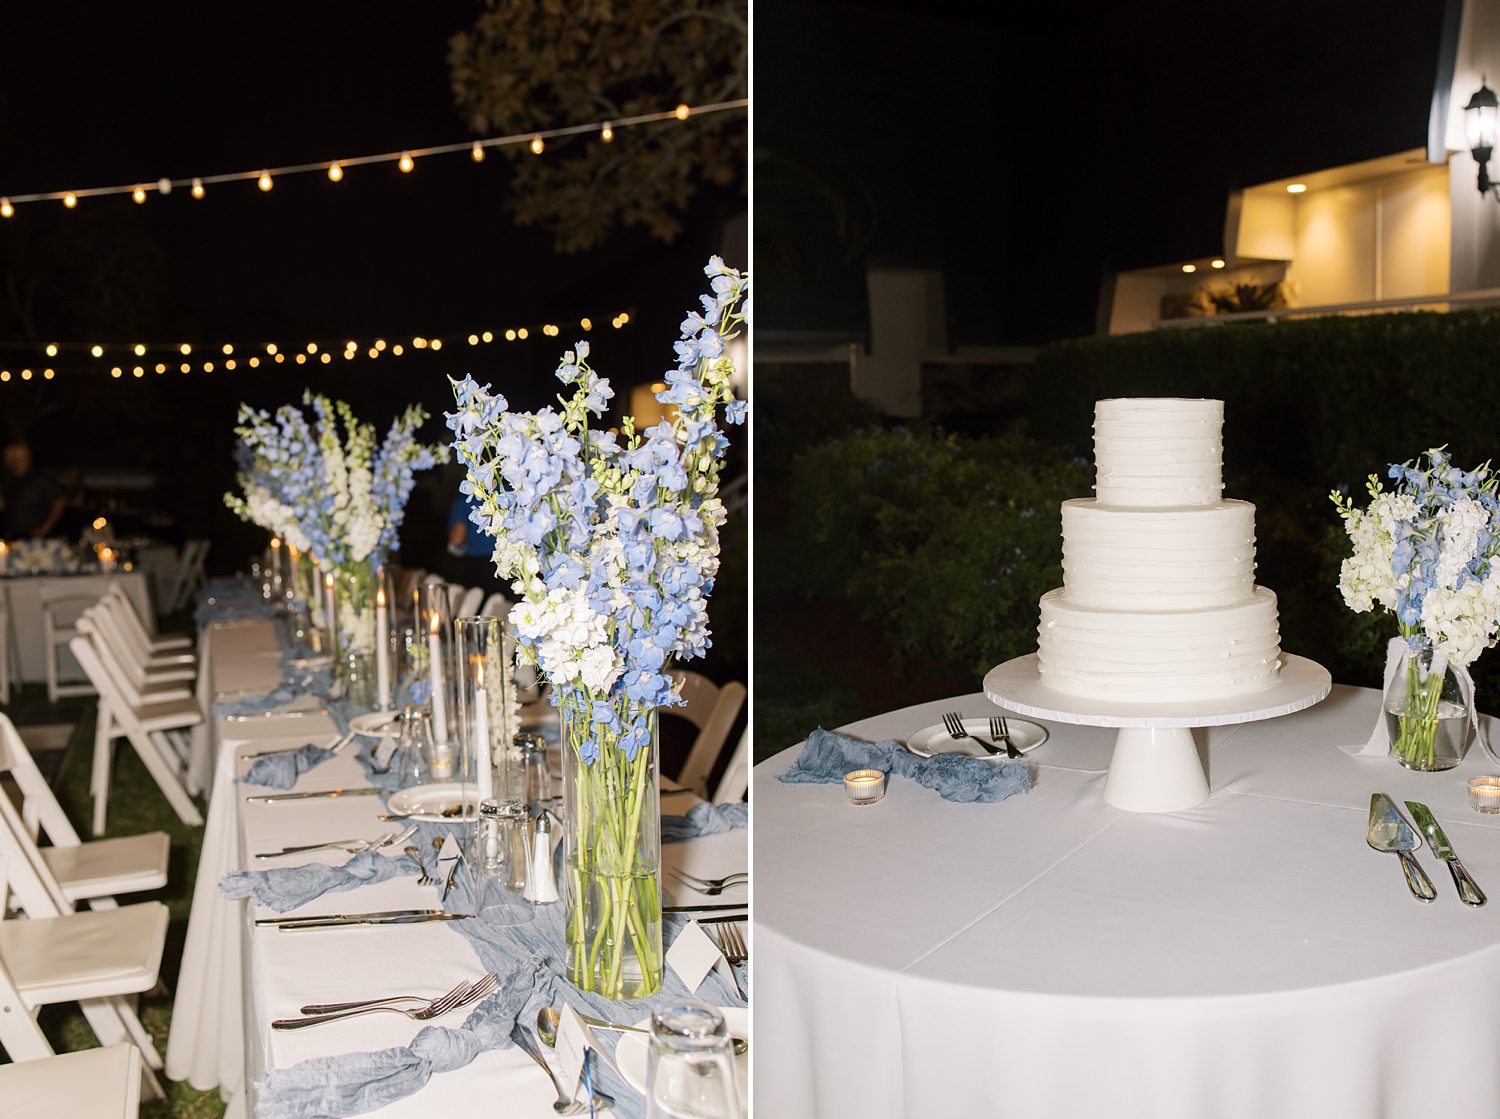 tiered wedding cake with blue and white floral centerpieces for open air reception at Innisbrook Resort